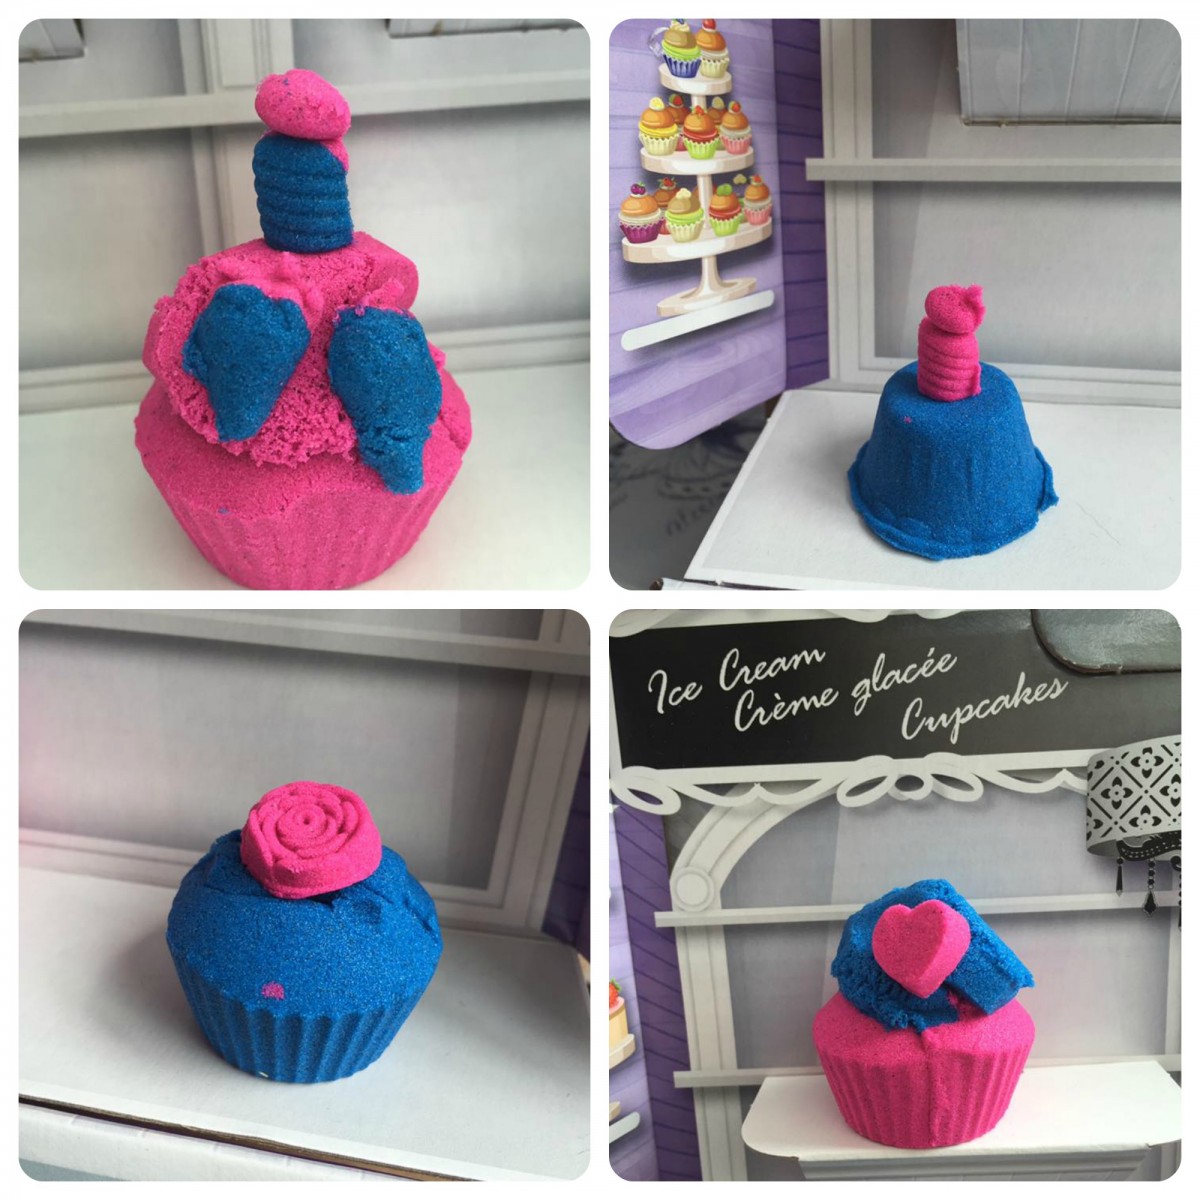 Bakery Boutique cakes